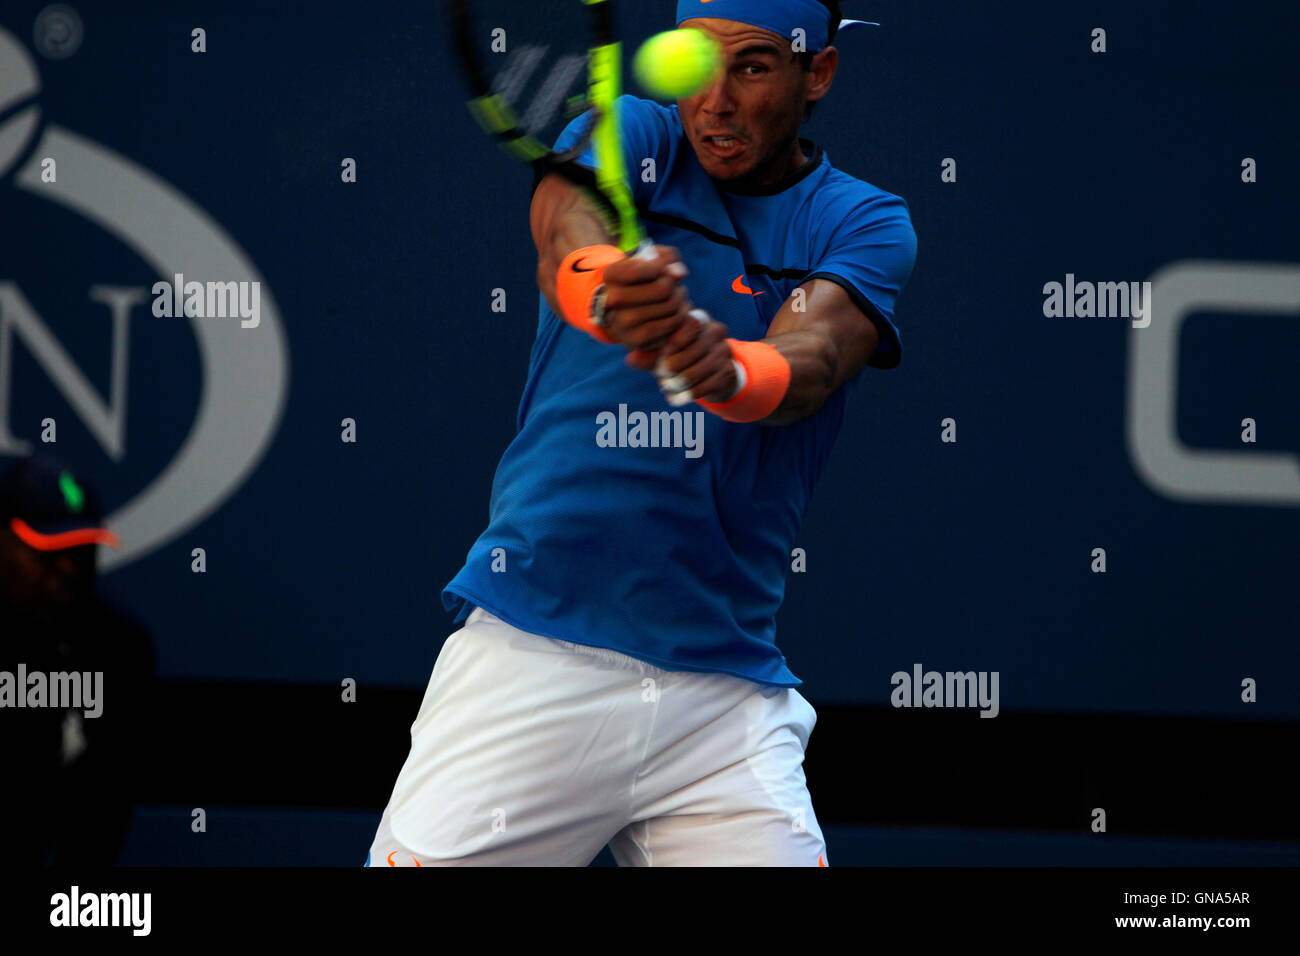 New York, United States. 29th Aug, 2016. Spain's Rafael Nadal in action during his first round match against Denis Istomin of Uzbekistan in the first round of the U.S. Open Tennis Championships at Flushing Meadows, New York on Monday, August 29th. Credit:  Adam Stoltman/Alamy Live News Stock Photo